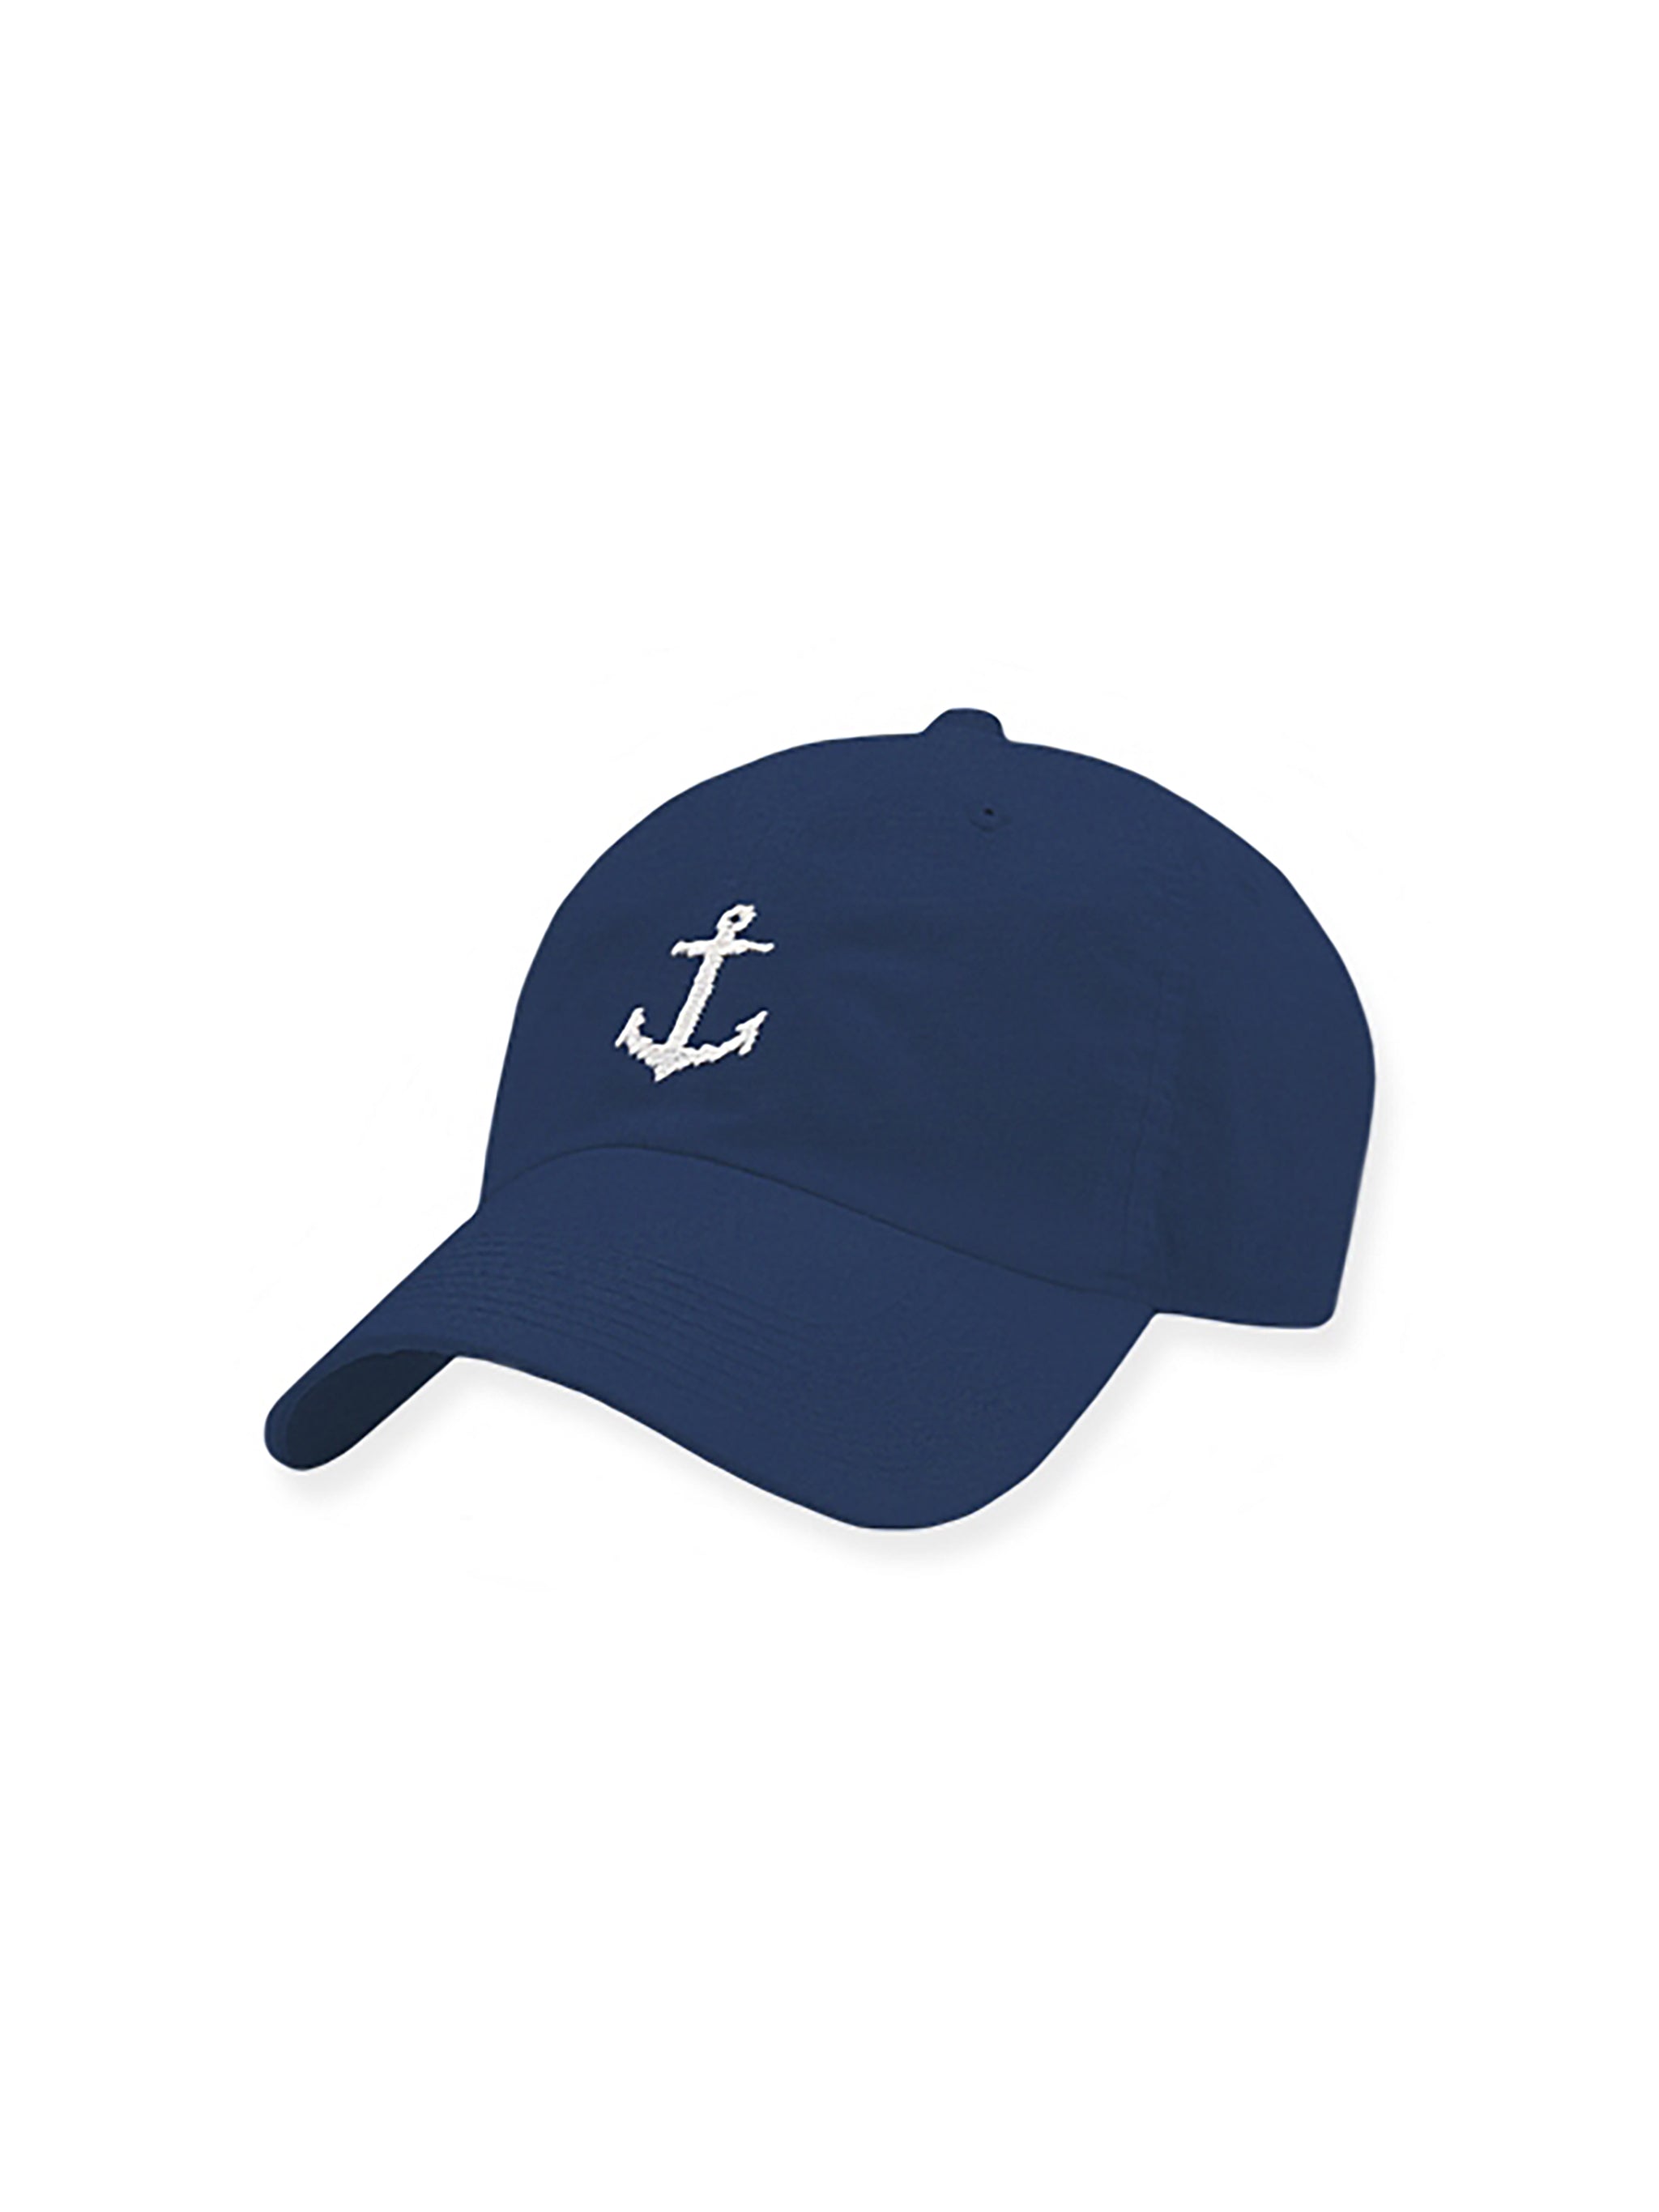 Shop the Smathers & Branson Anchor Needlepoint Performance Hat at